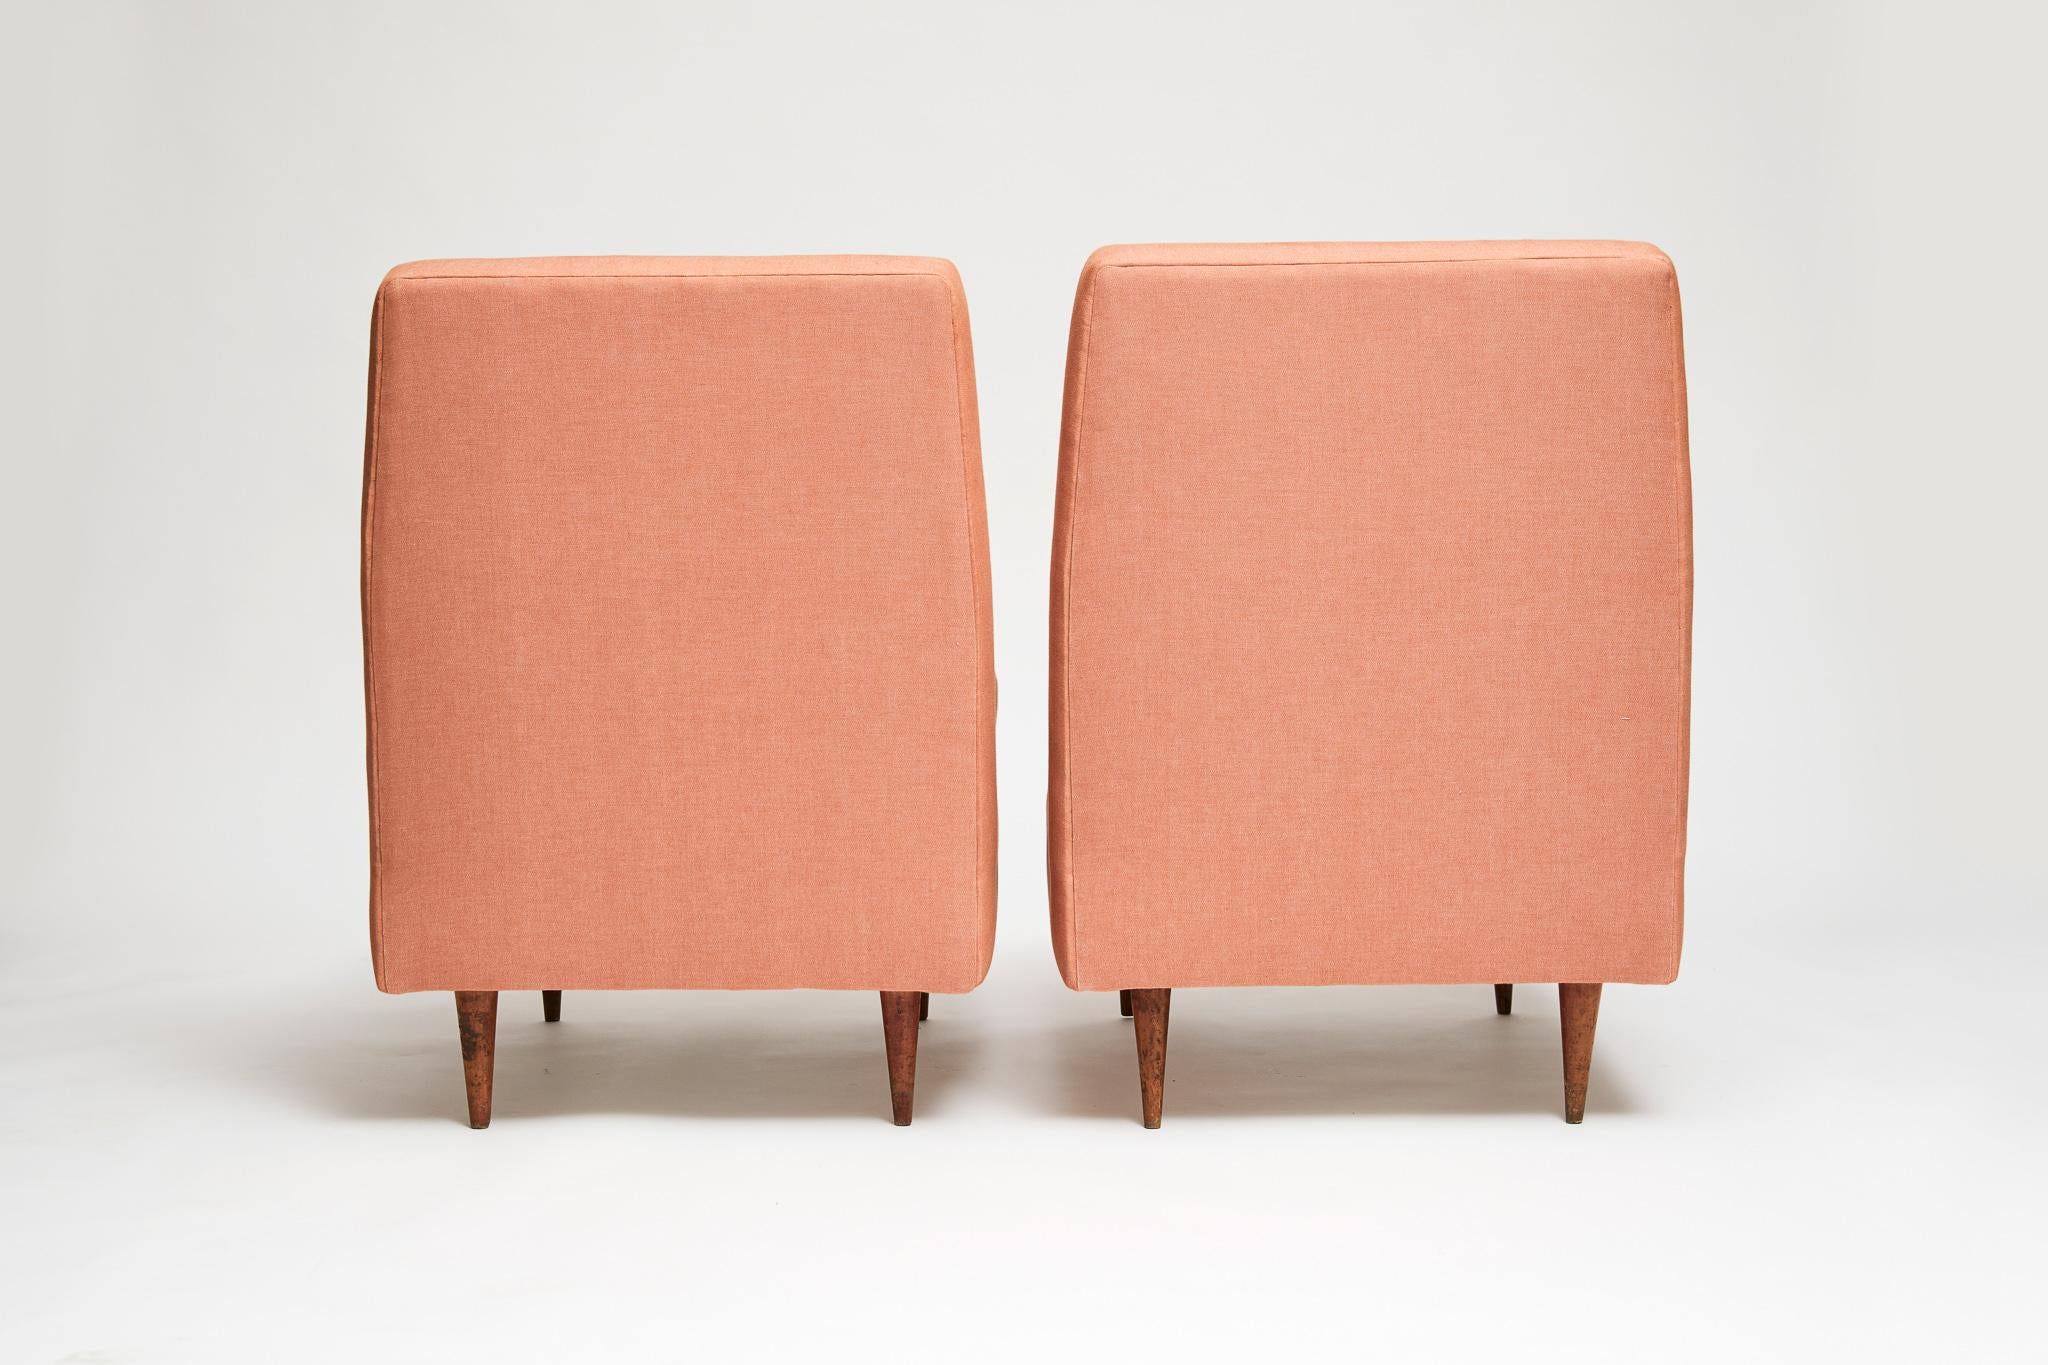 Brazilian Modern Armchairs in Hardwood & Salmon Linen by Joaquim Tenreiro 1958 In Good Condition For Sale In New York, NY